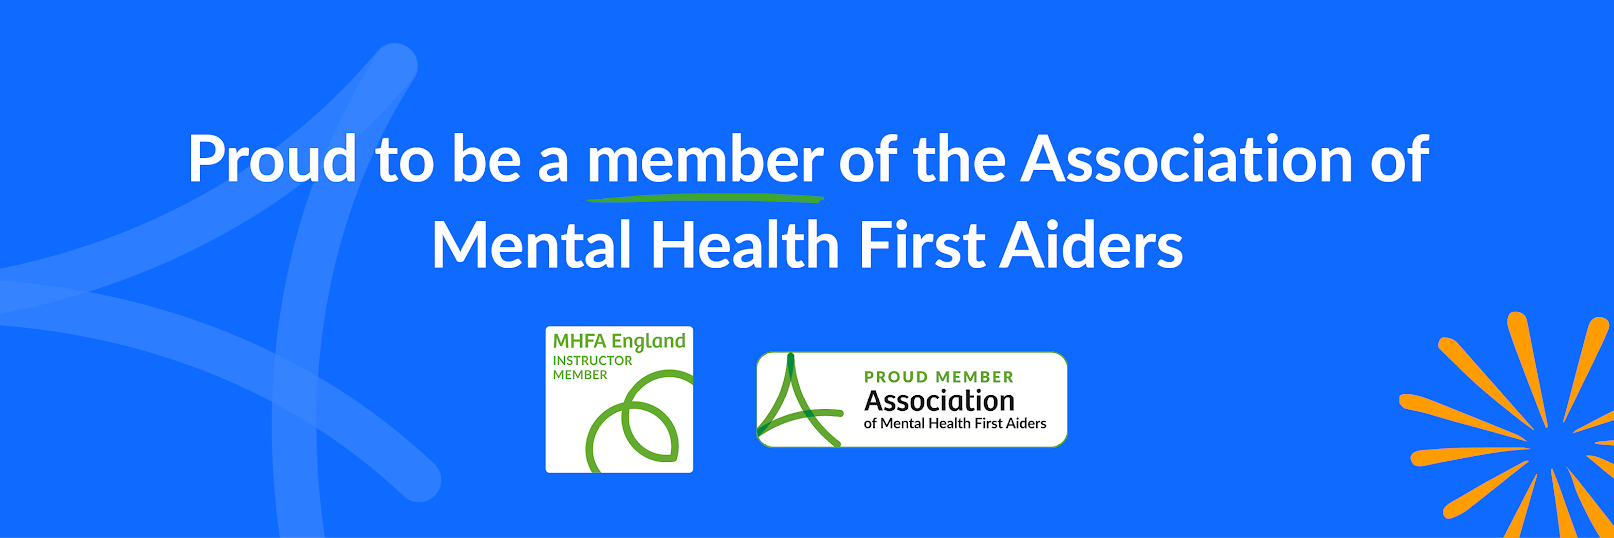 Association of Mental Health First Aiders